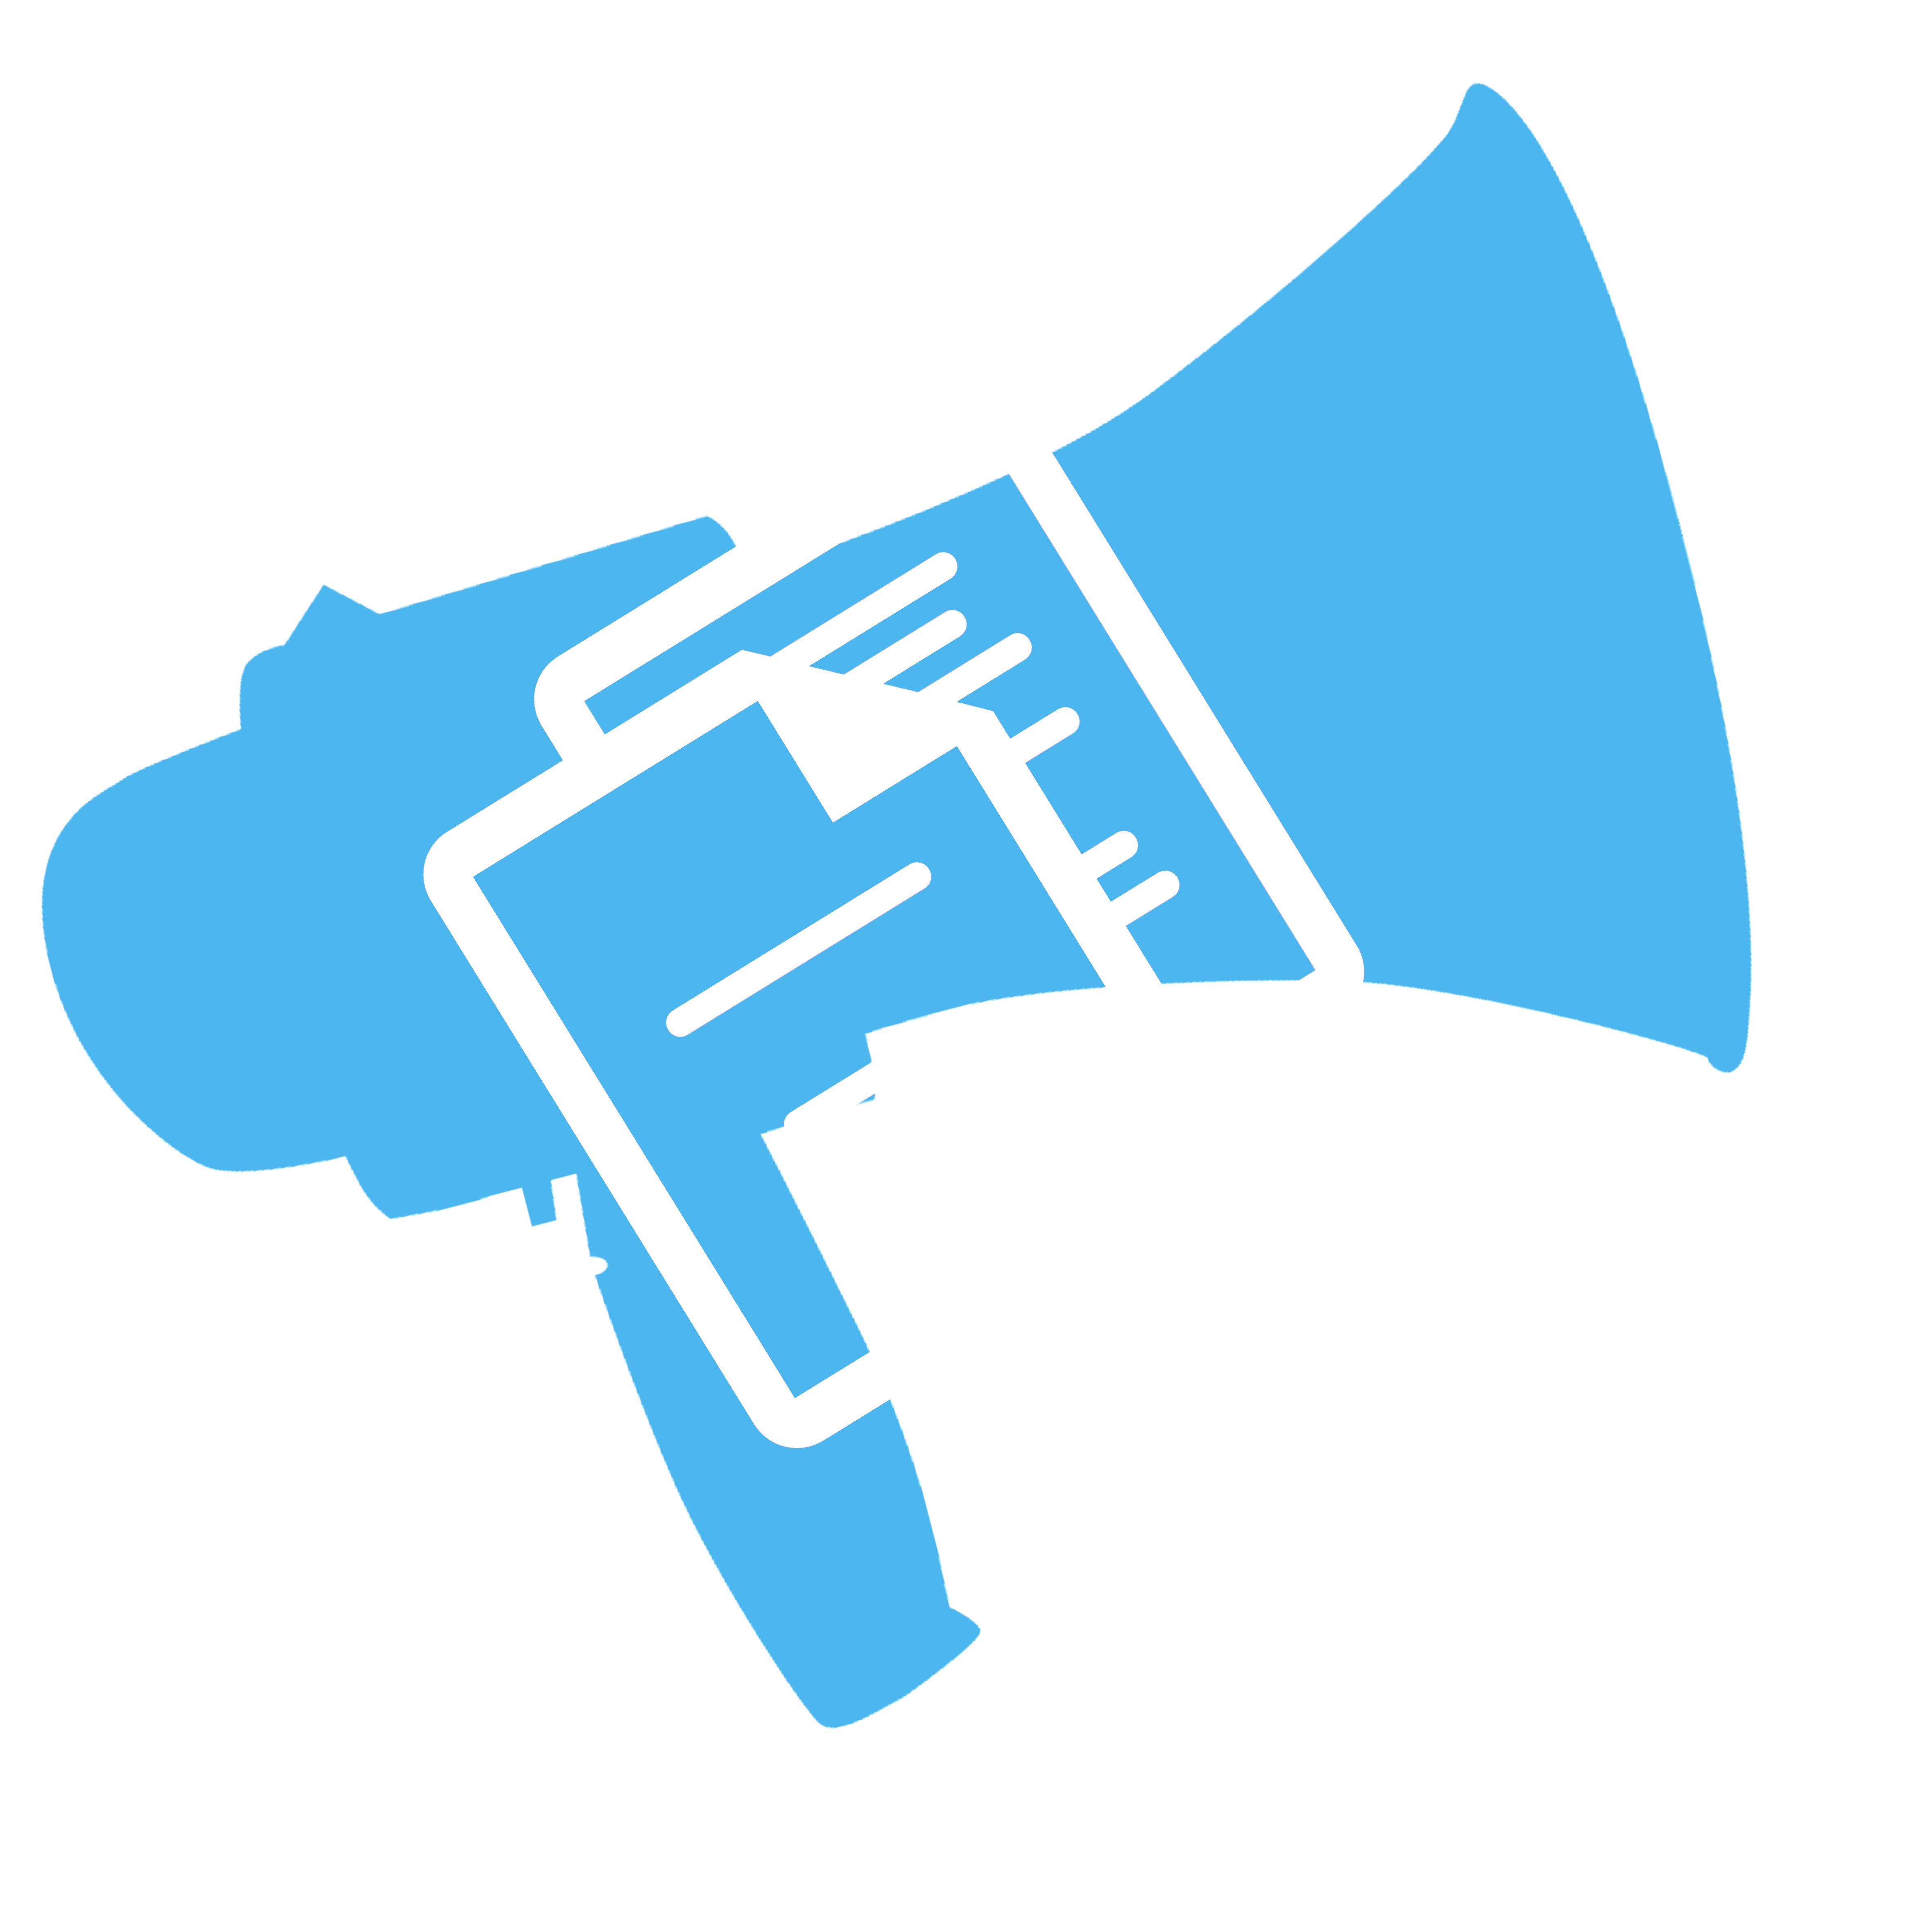 An icon of a megaphone with the icon of a document overlayed